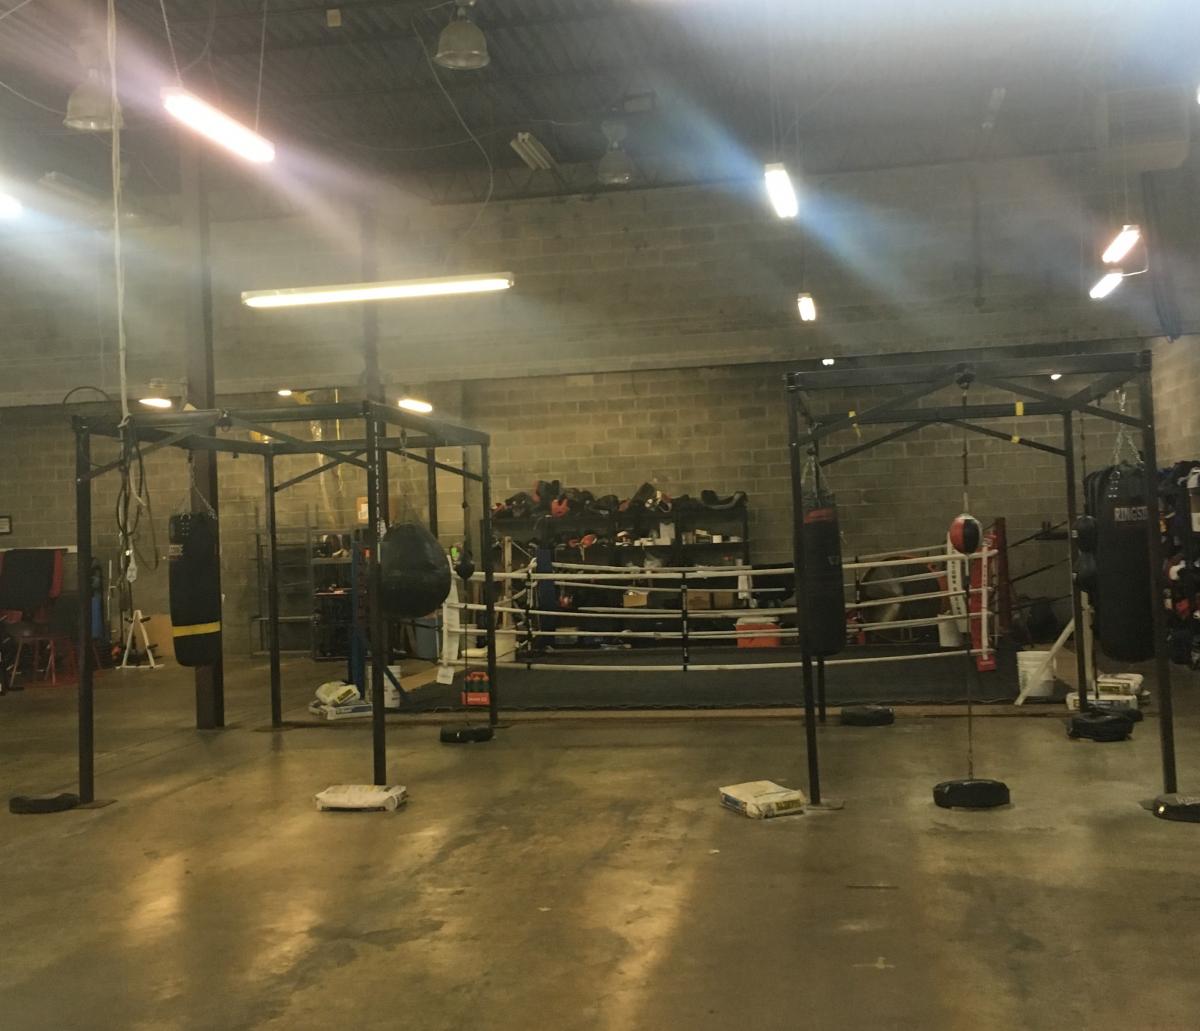 inside the boxing gym